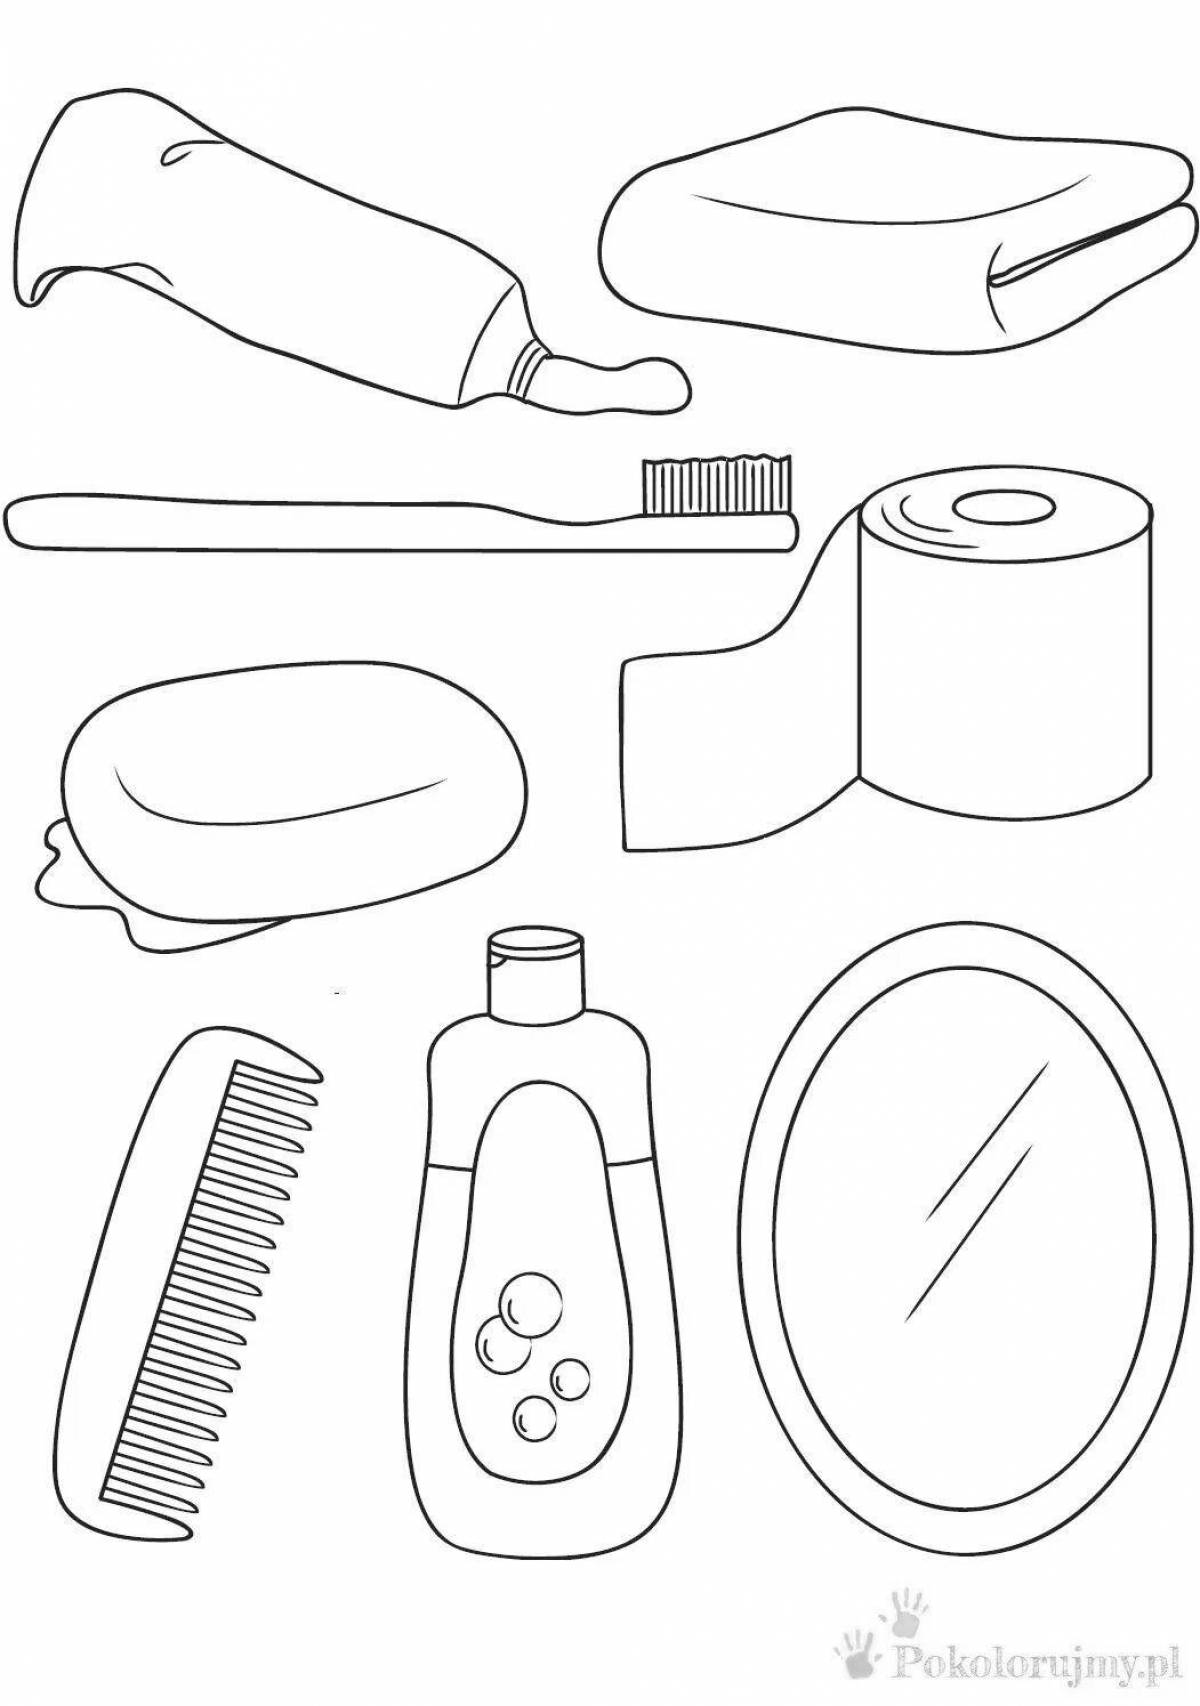 Colorful hygiene products coloring page